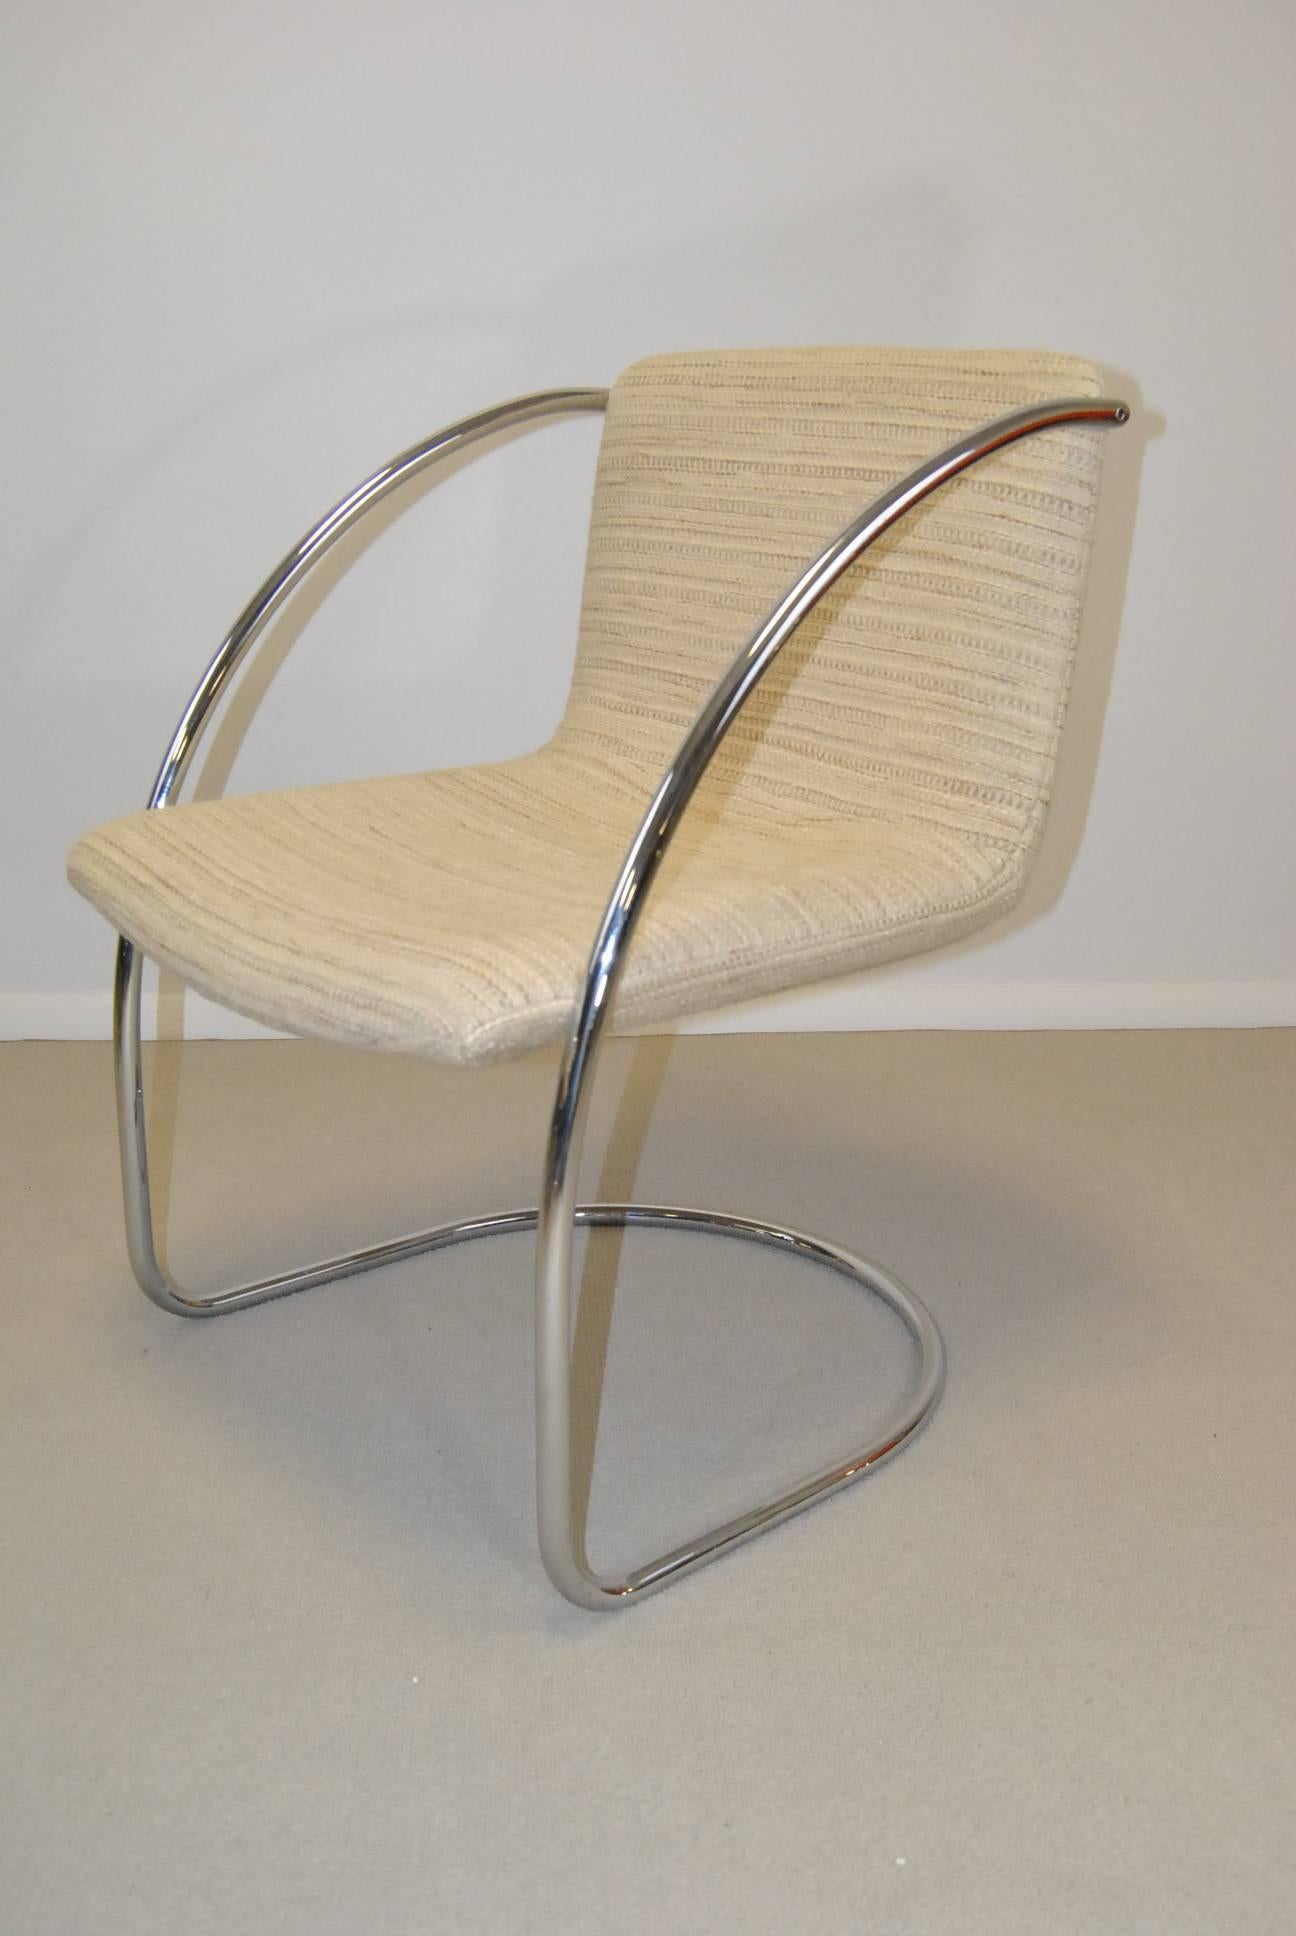 Classic set of Mid-Century design dining chairs by Milo Baughman. Each chair has a curved chrome frame which supports an upholstered back and seat. Upholstery is a heavyweight fabric with minimum wear and some imperfections. Very solid chairs,